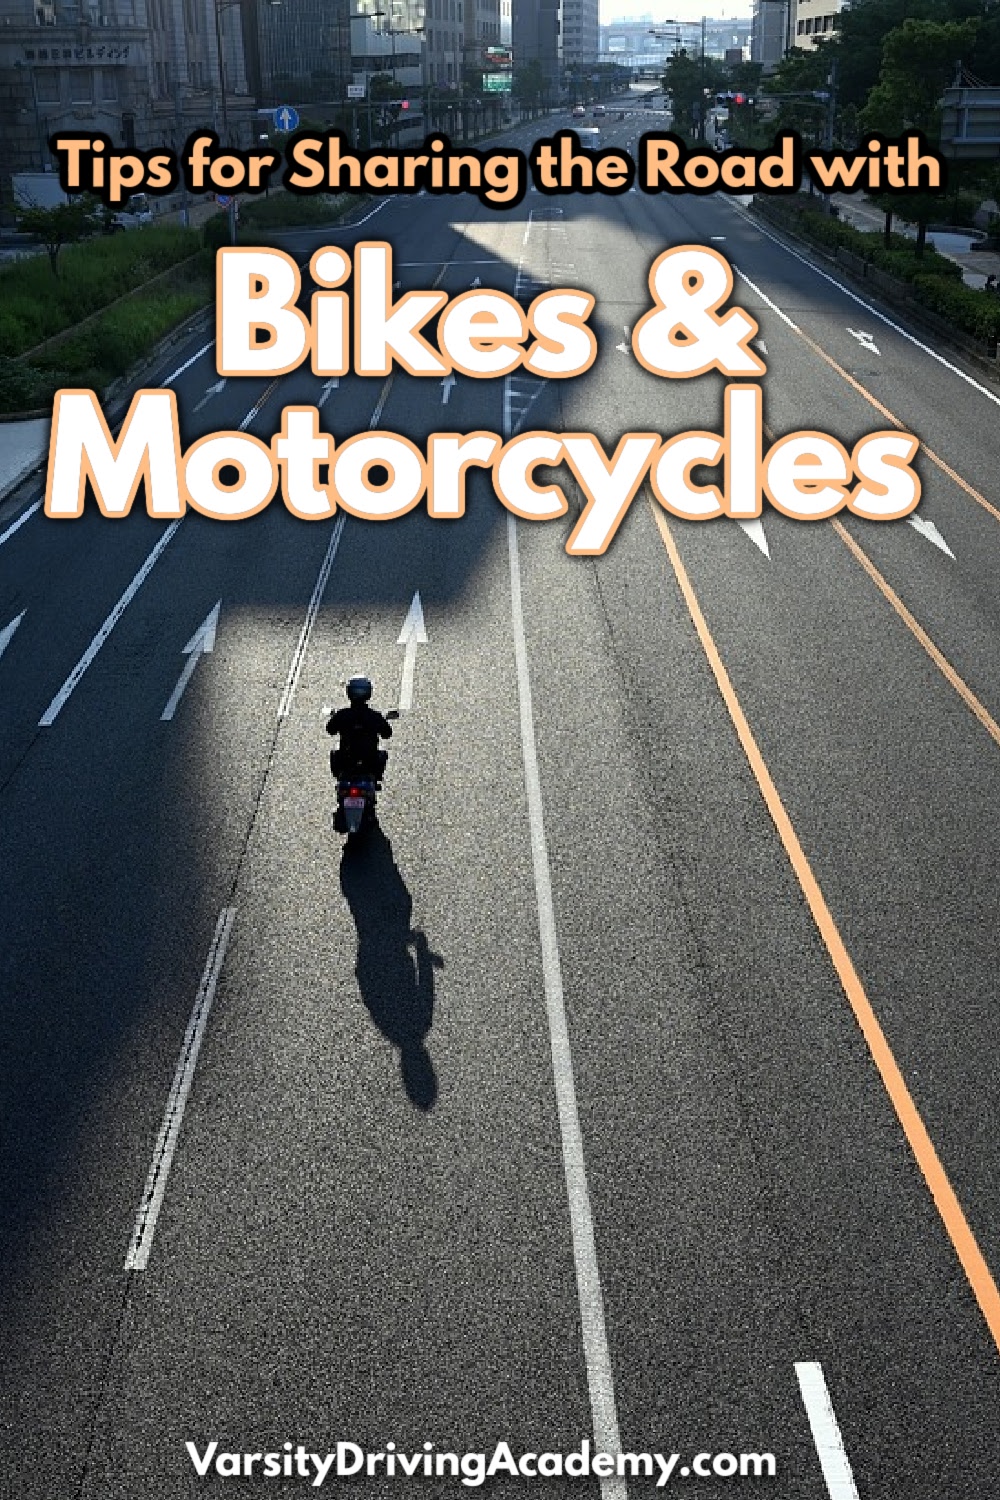 May is the month to learn and remind yourself how to share the road with bicycles and motorcycles, no matter how well you drive.